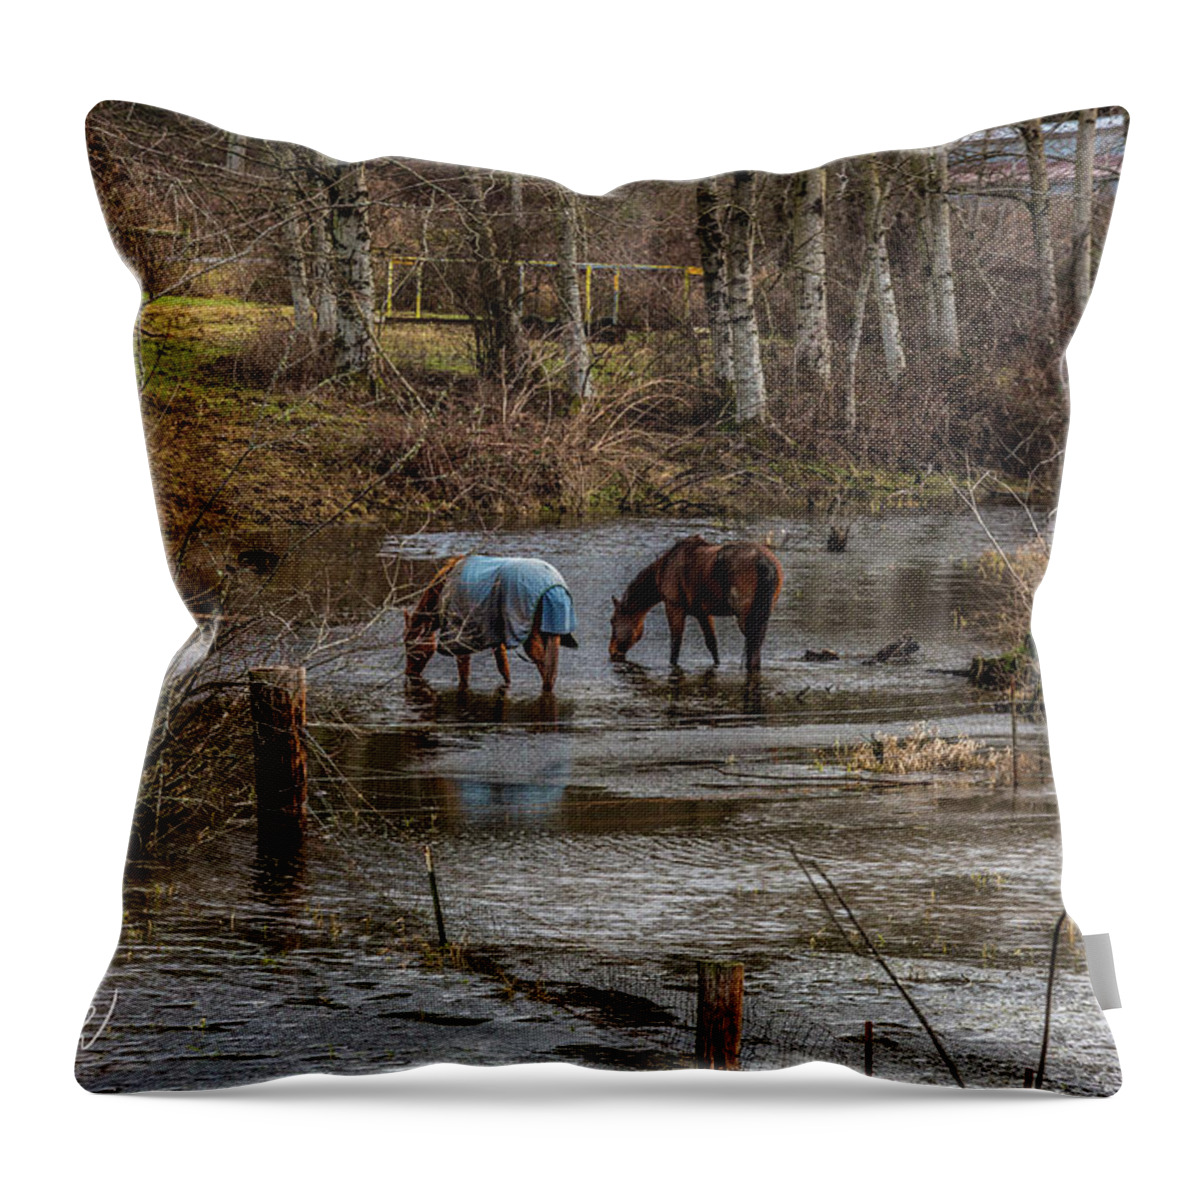 Animals Throw Pillow featuring the photograph Drinking Horses by Mark Joseph